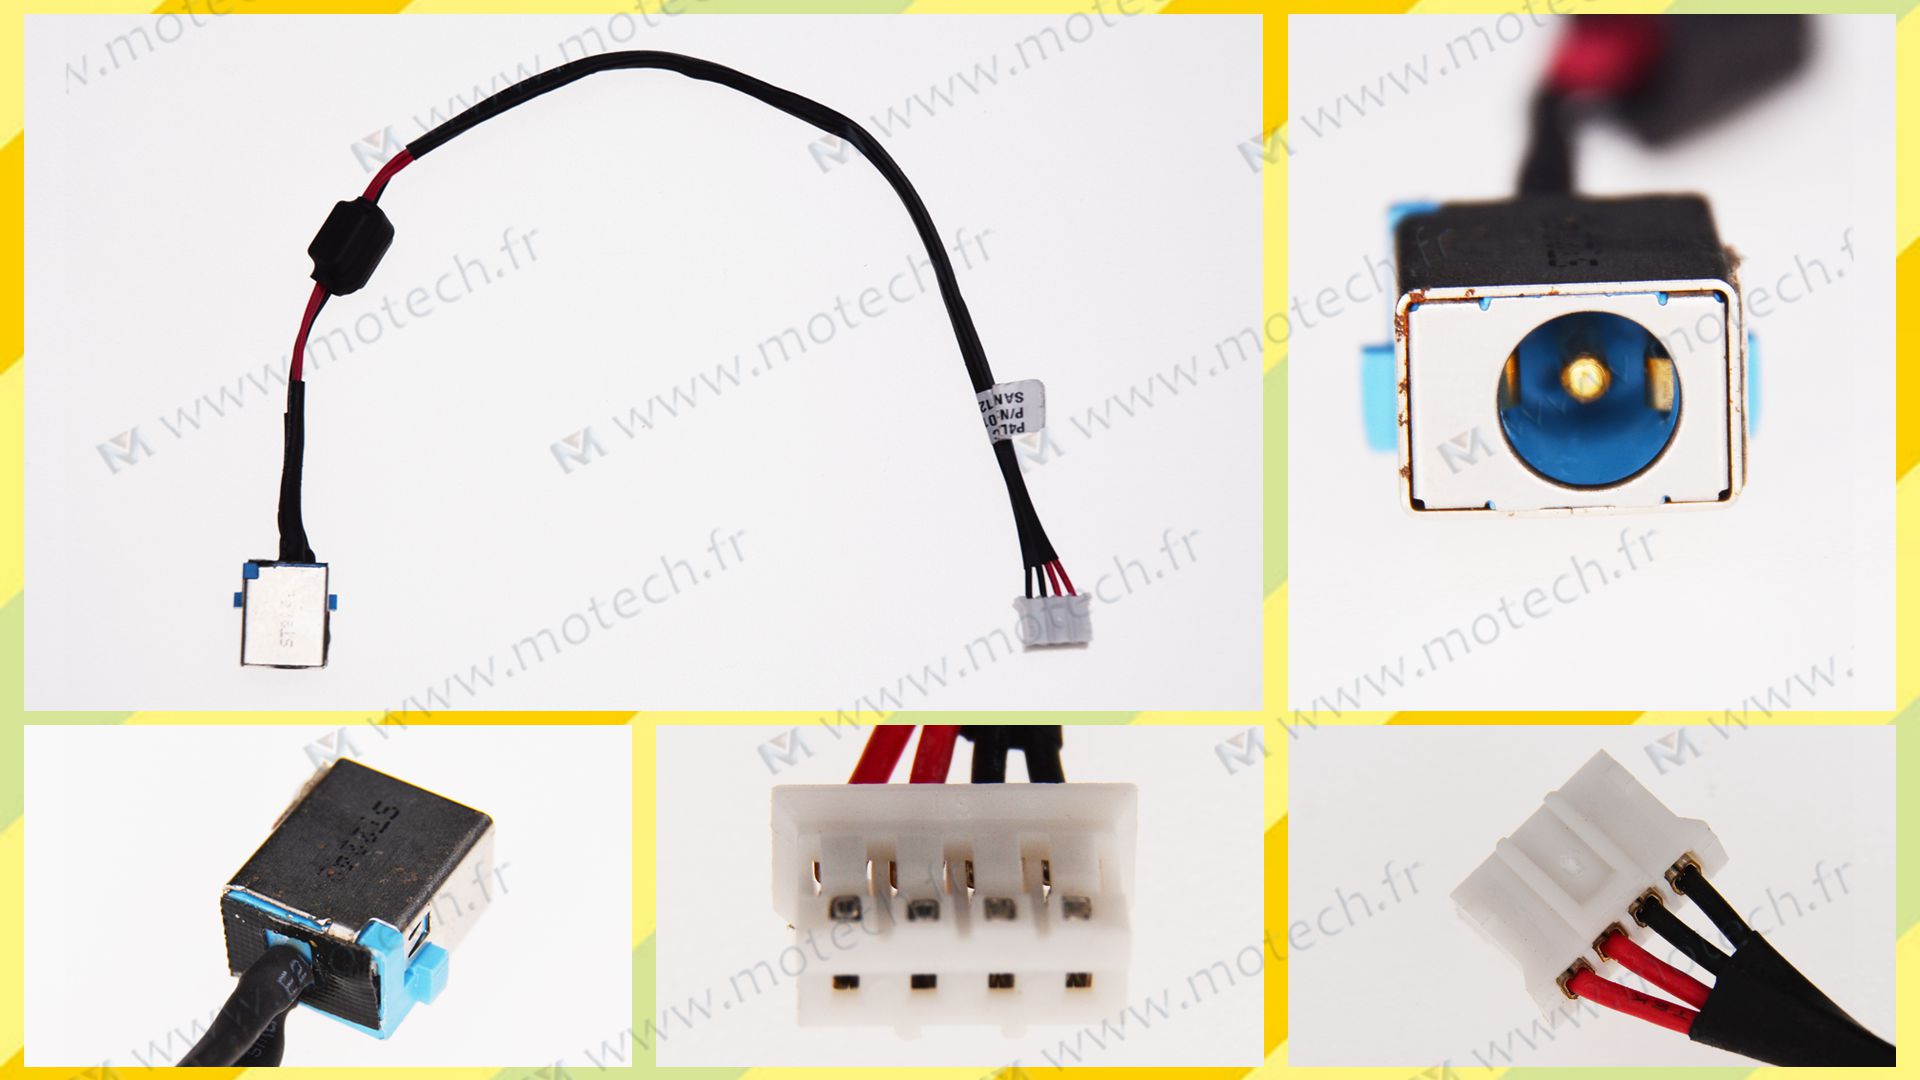 Acer E1-571 charging connector, Acer E1-571 DC Power Jack, Acer E1-571 DC IN Cable, Acer E1-571 Power Jack, Acer E1-571 plug, Acer E1-571 Jack socket, Acer E1-571 connecteur de charge, 